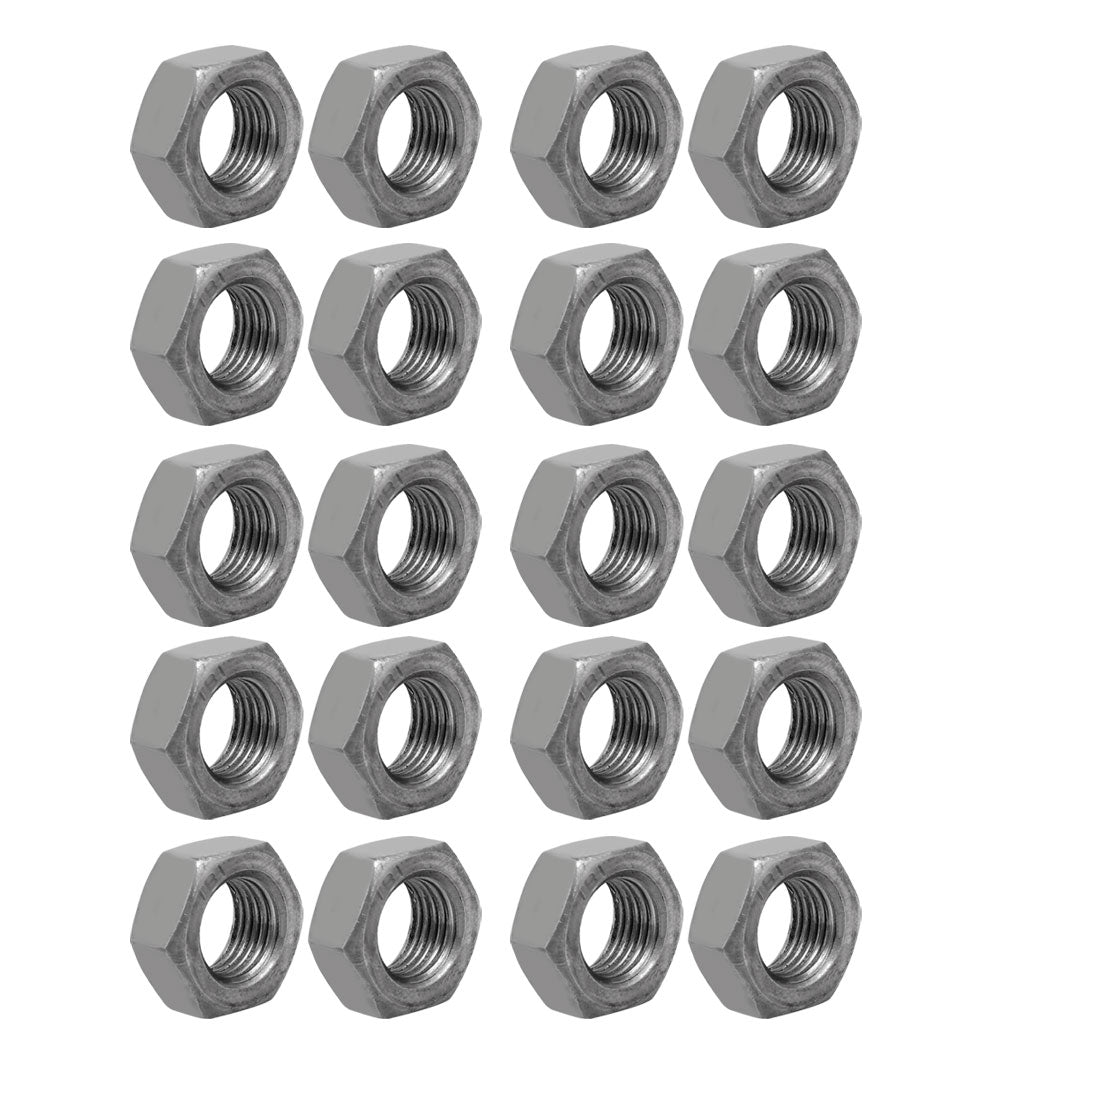 uxcell Uxcell 20pcs M14 x 1.5mm Pitch Metric Fine Thread Carbon Steel Left Hand Hex Nuts